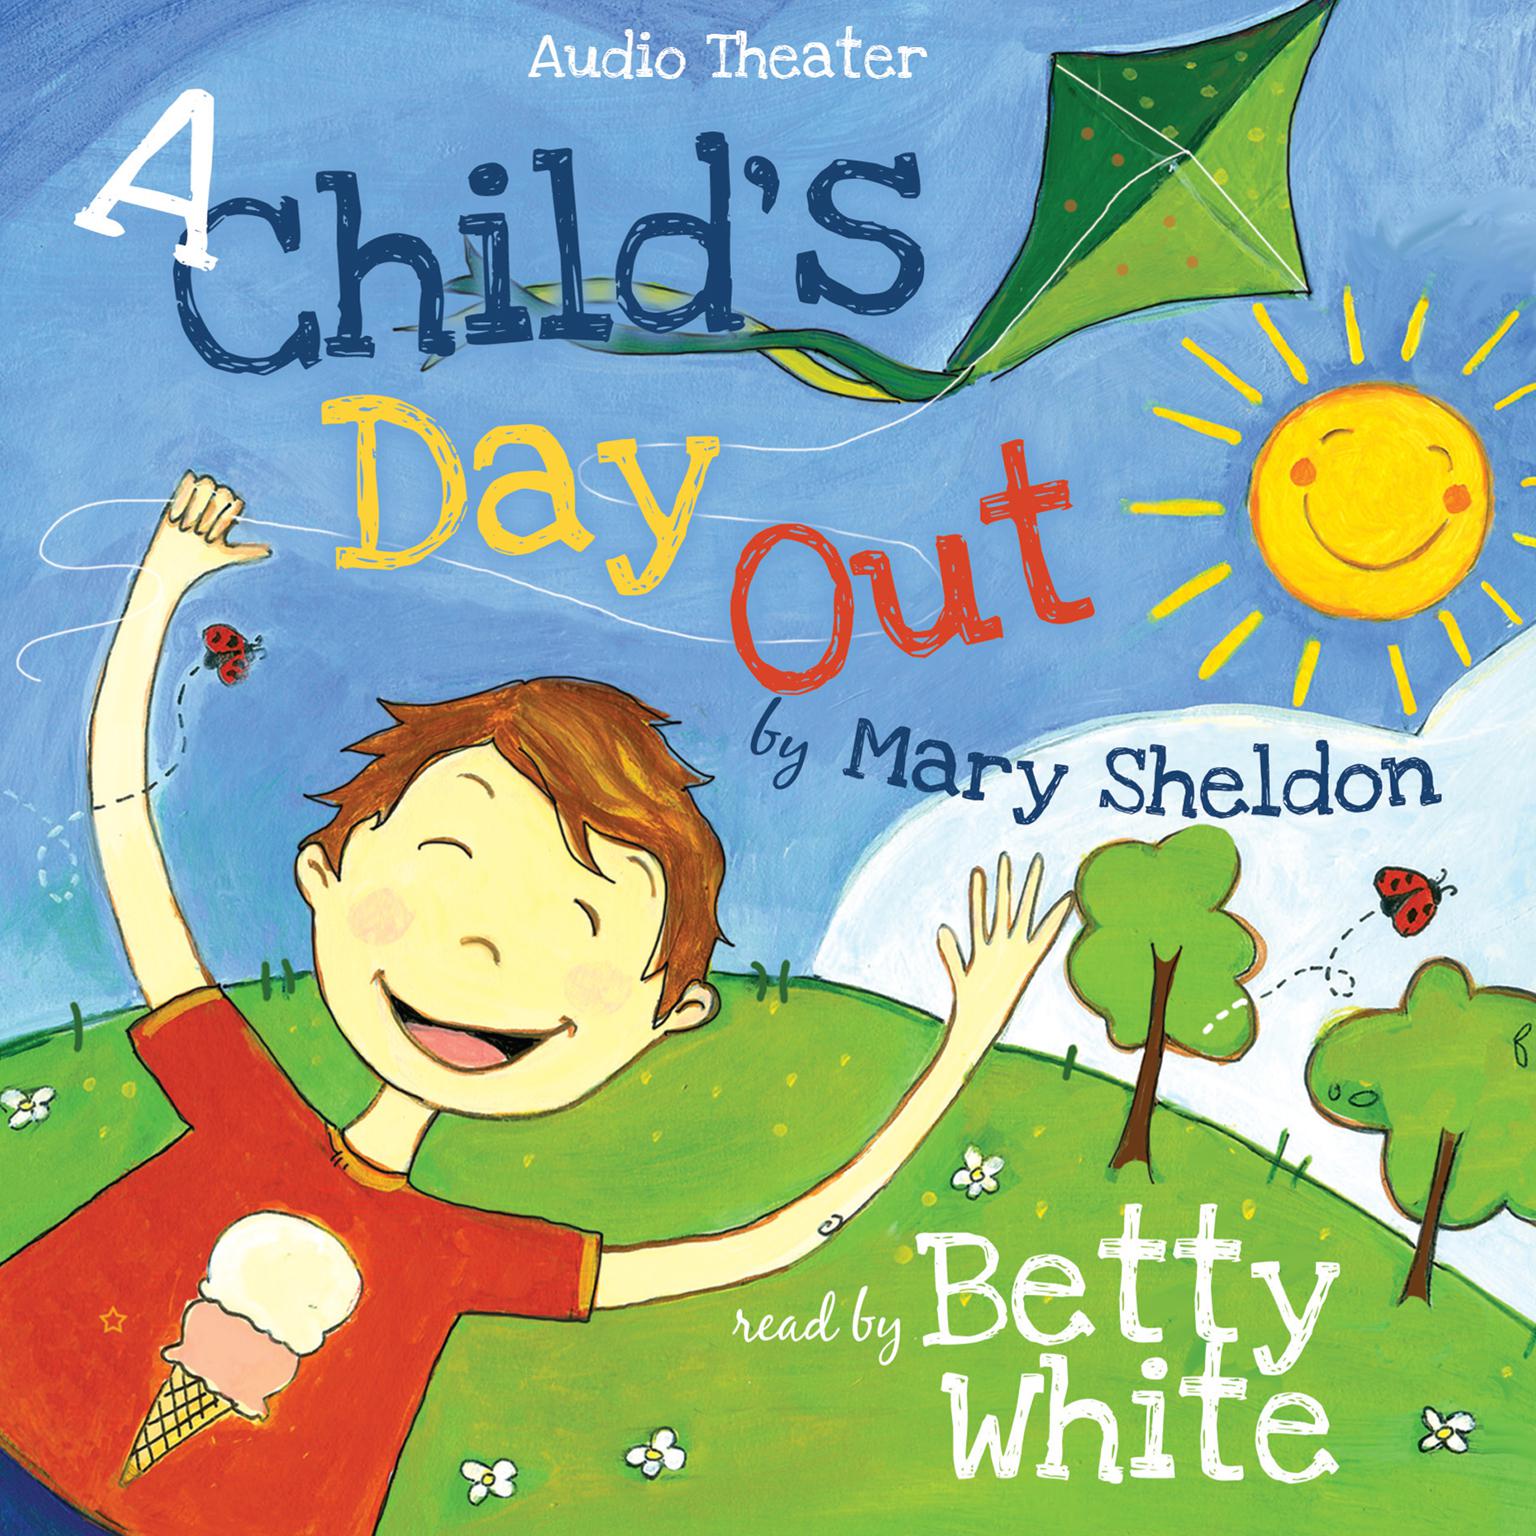 A Child’s Day Out Audiobook, by Mary Sheldon